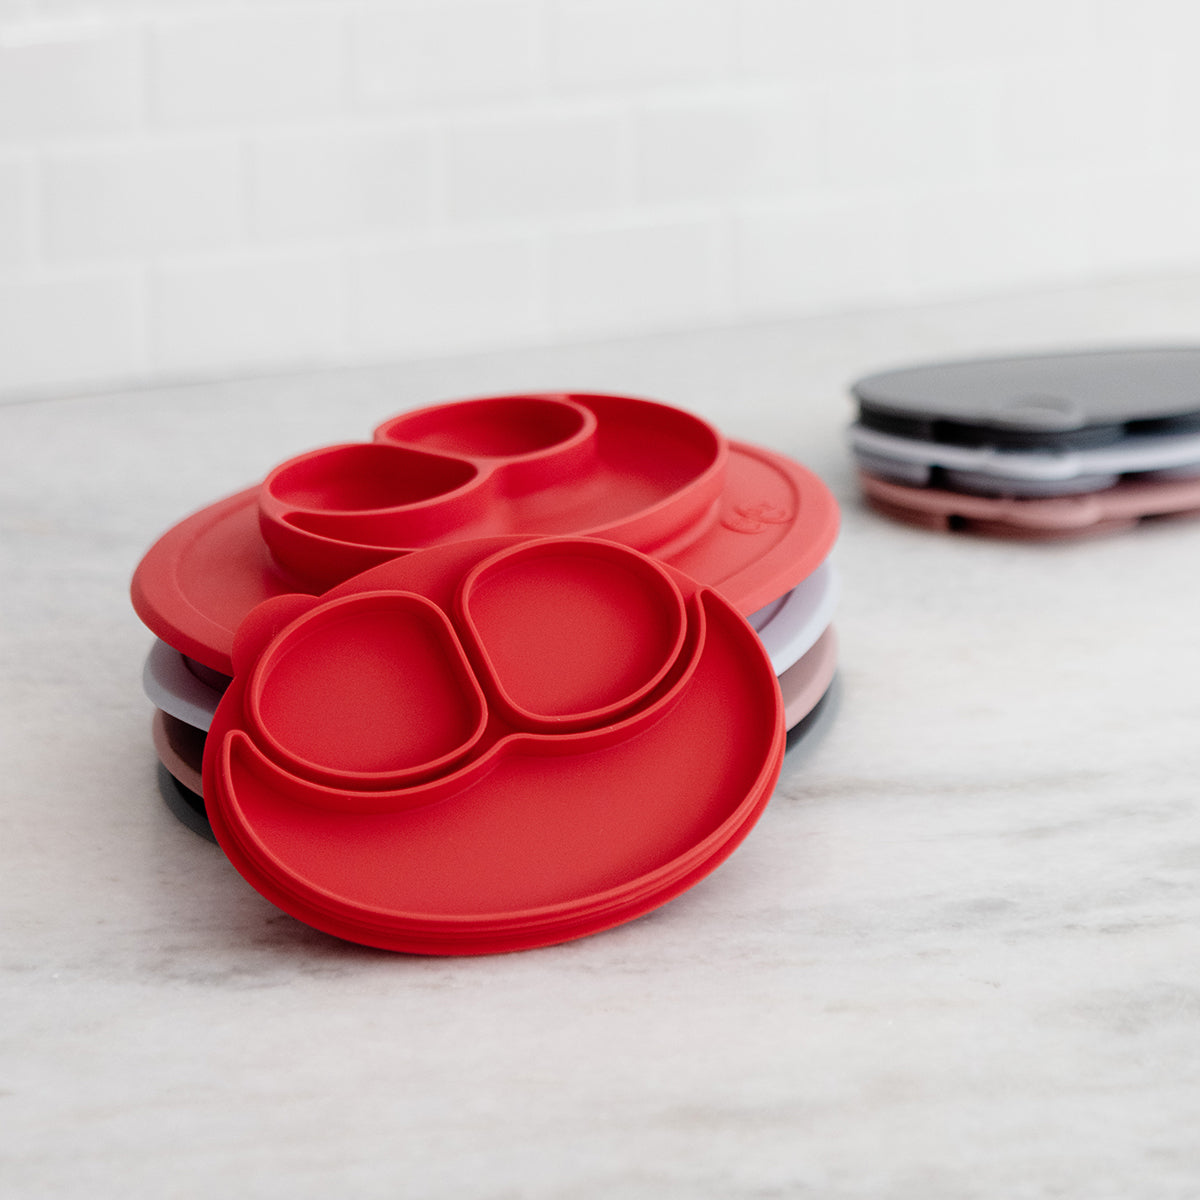 Mini Mat Lid in Coral / Storage Lids for the Mini Mat by ezpz / Silicone Lid for Toddler Plate